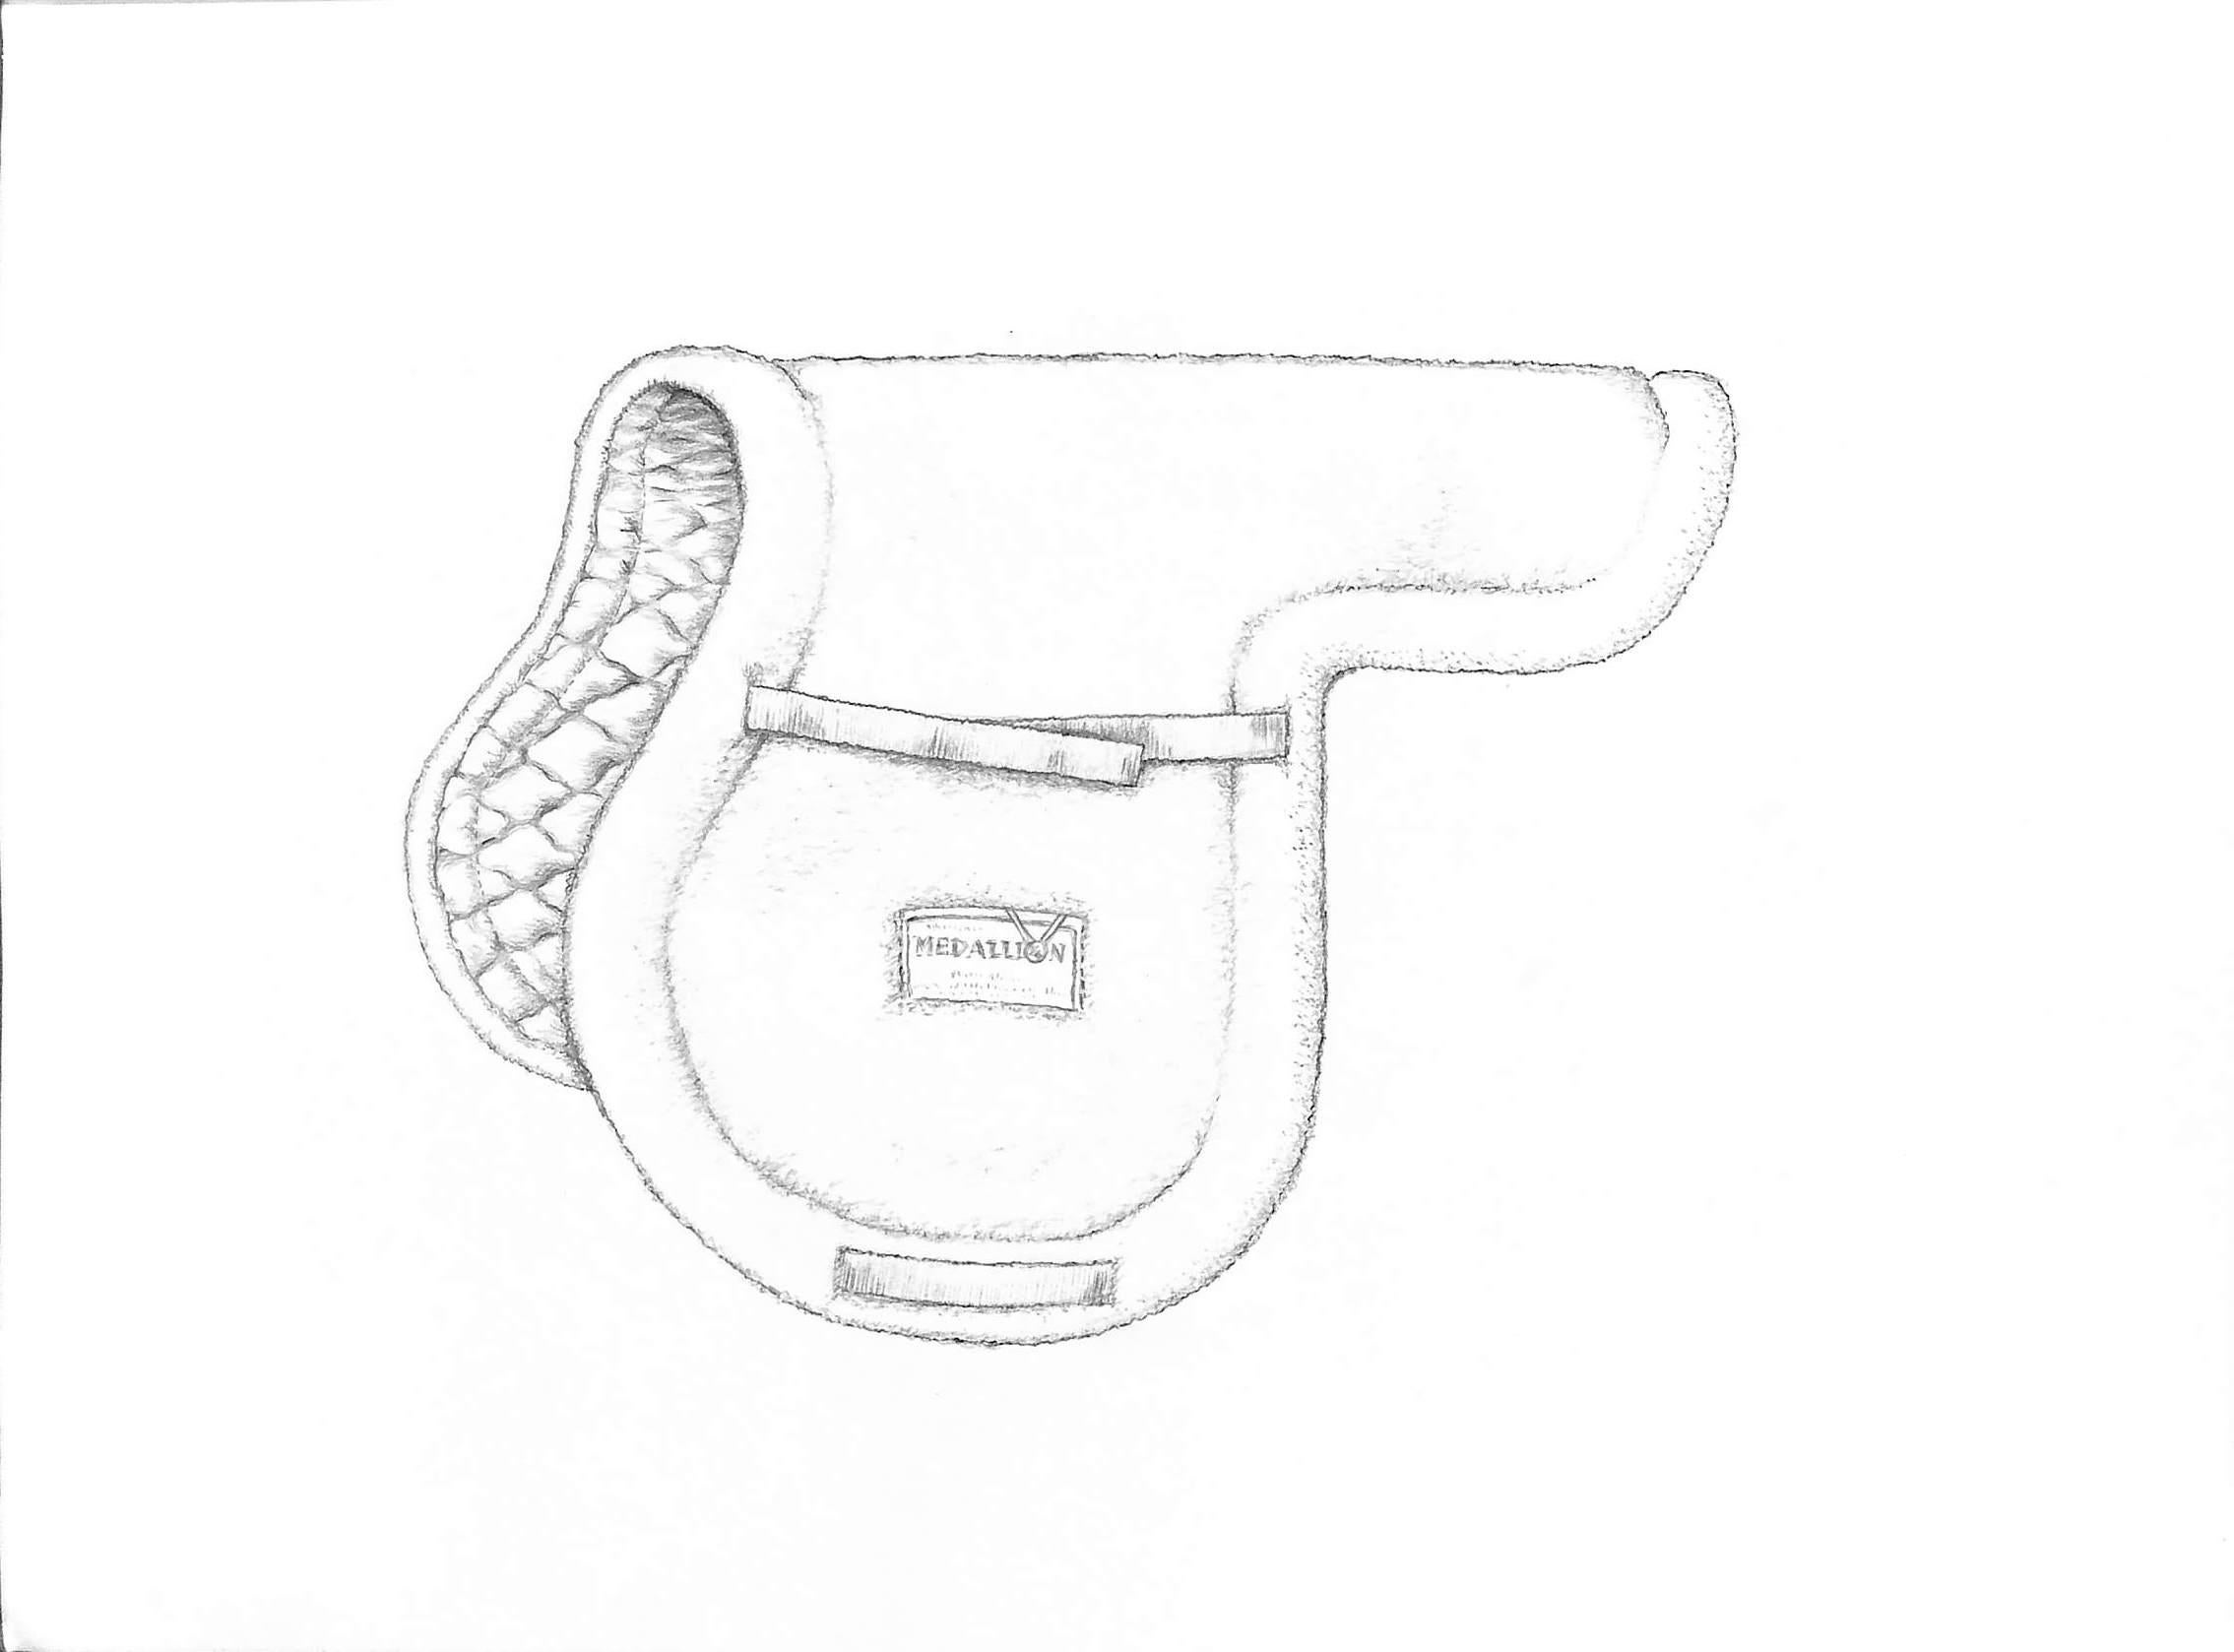 Cotton Fleece Saddle Pad Graphite Drawing - Art by Unknown